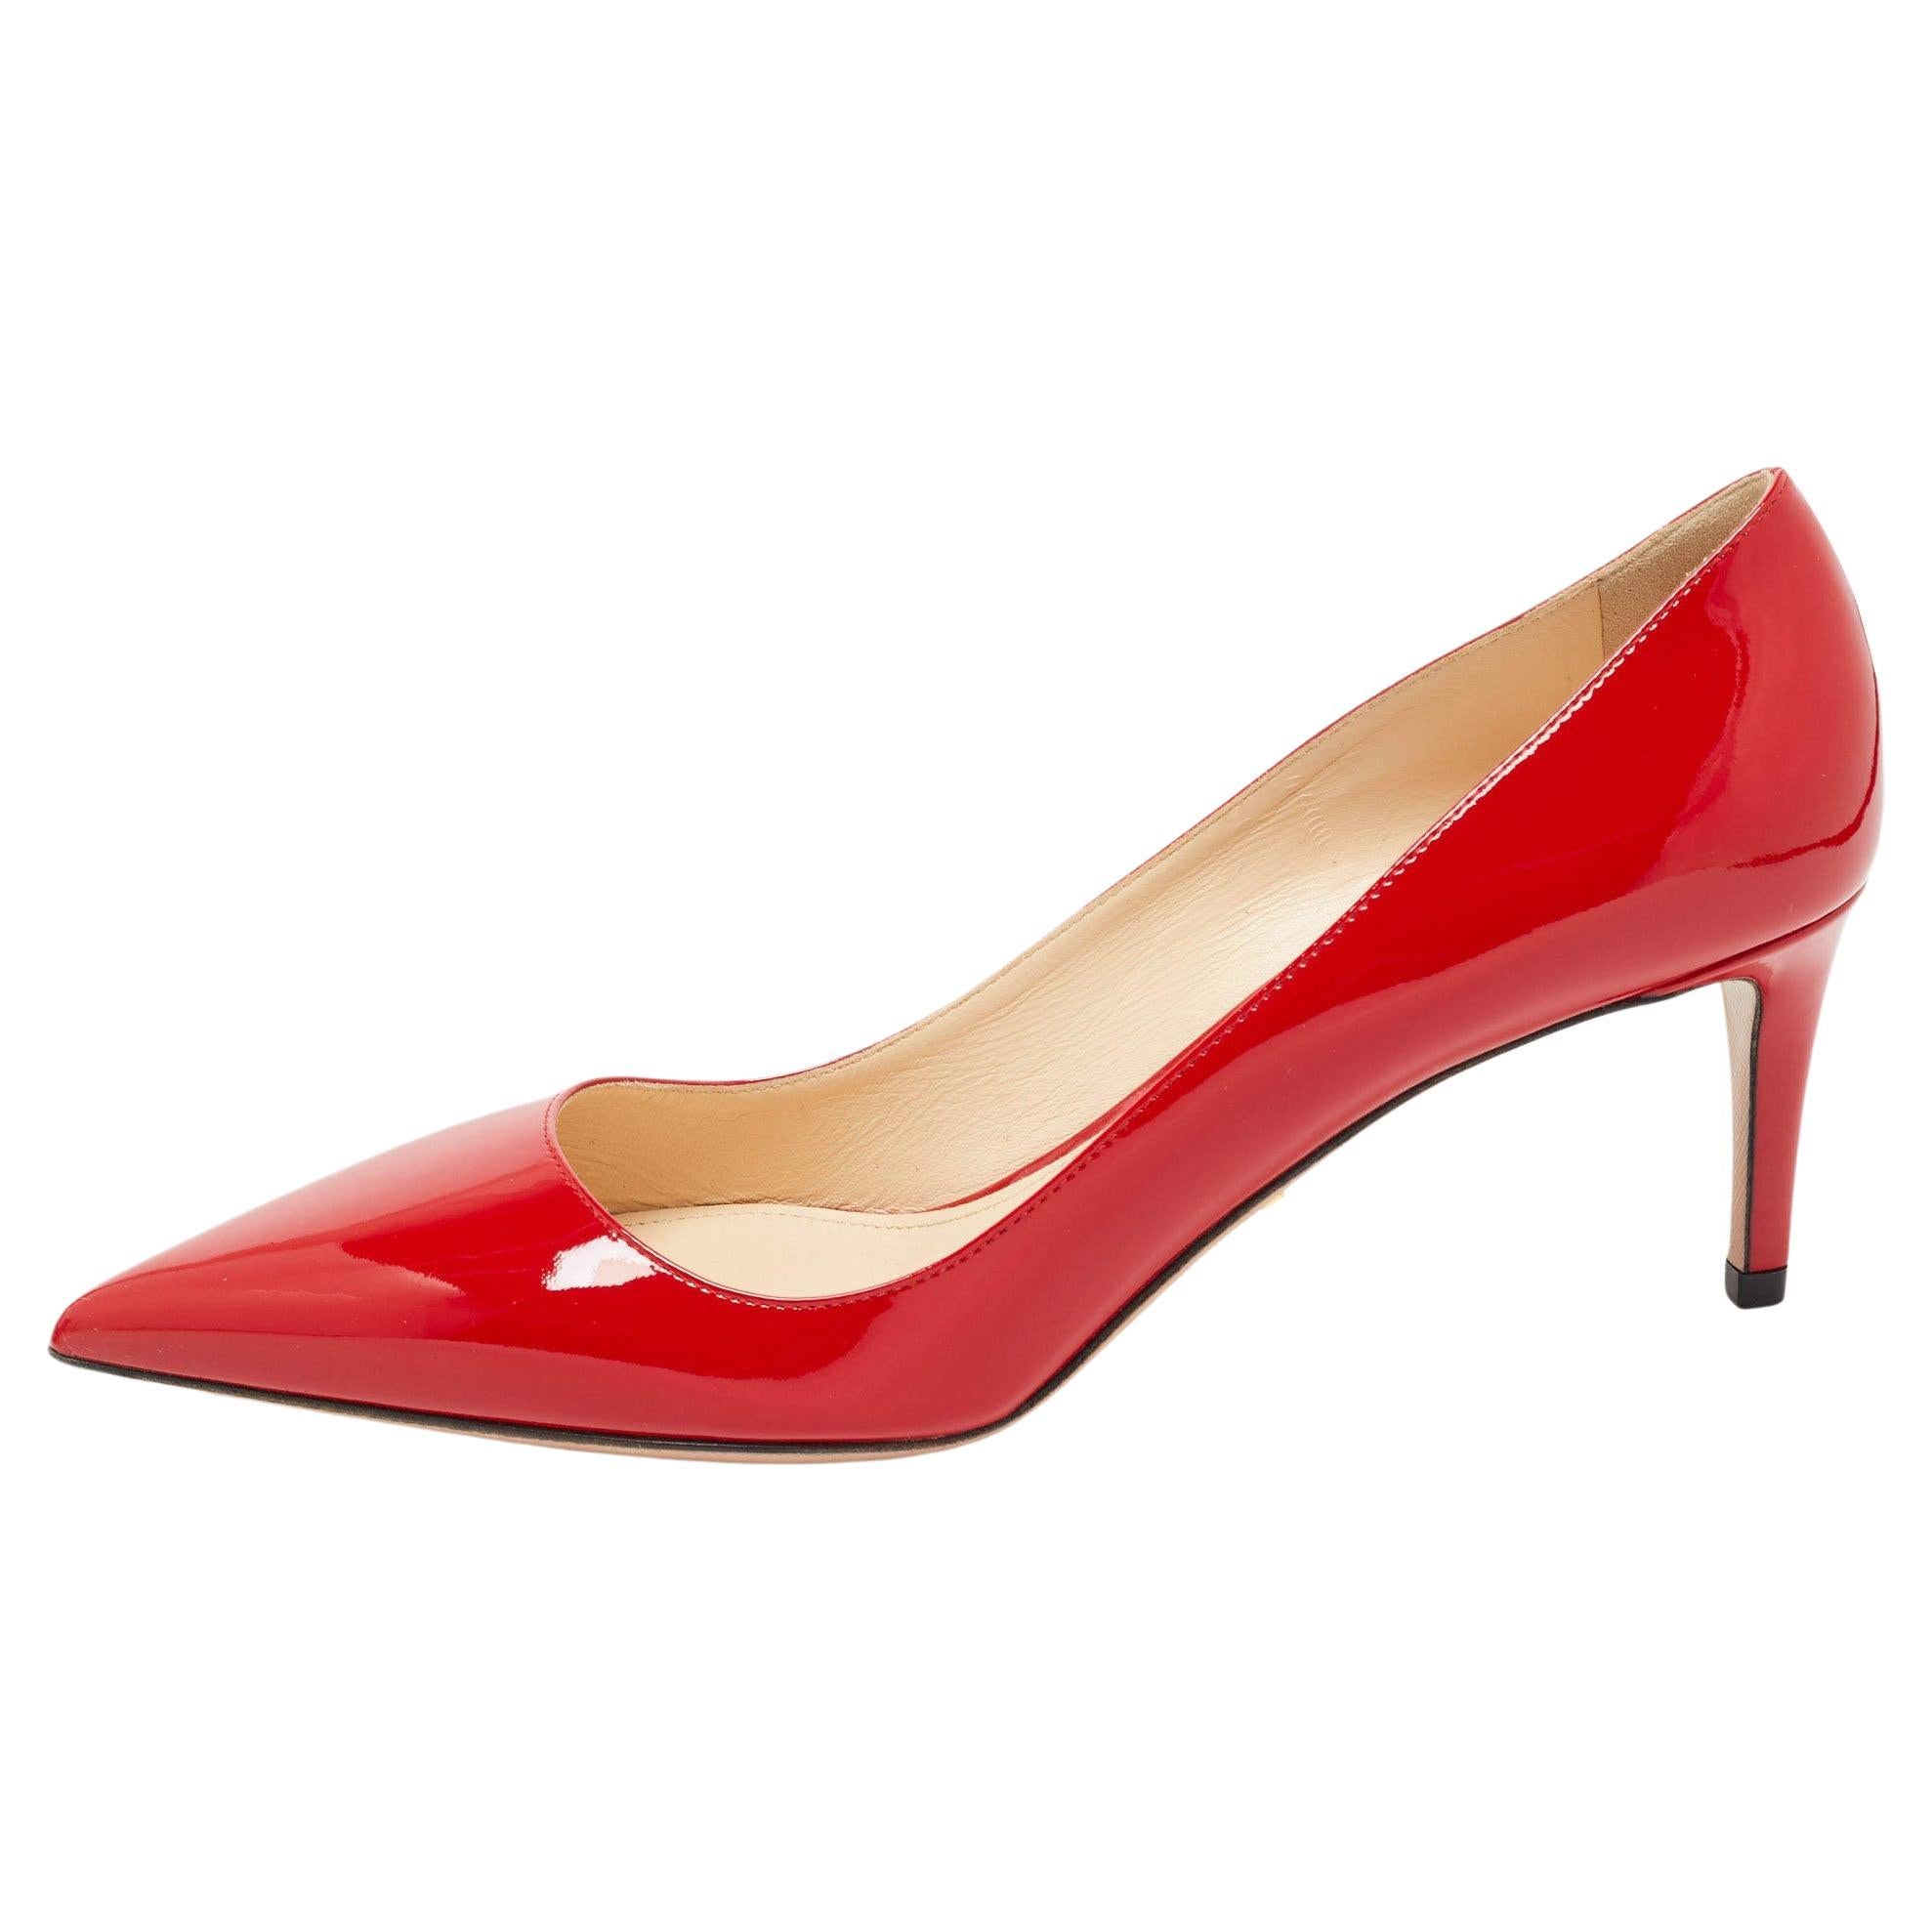 Prada Red Patent Leather Pointed Toe Pumps Size 40